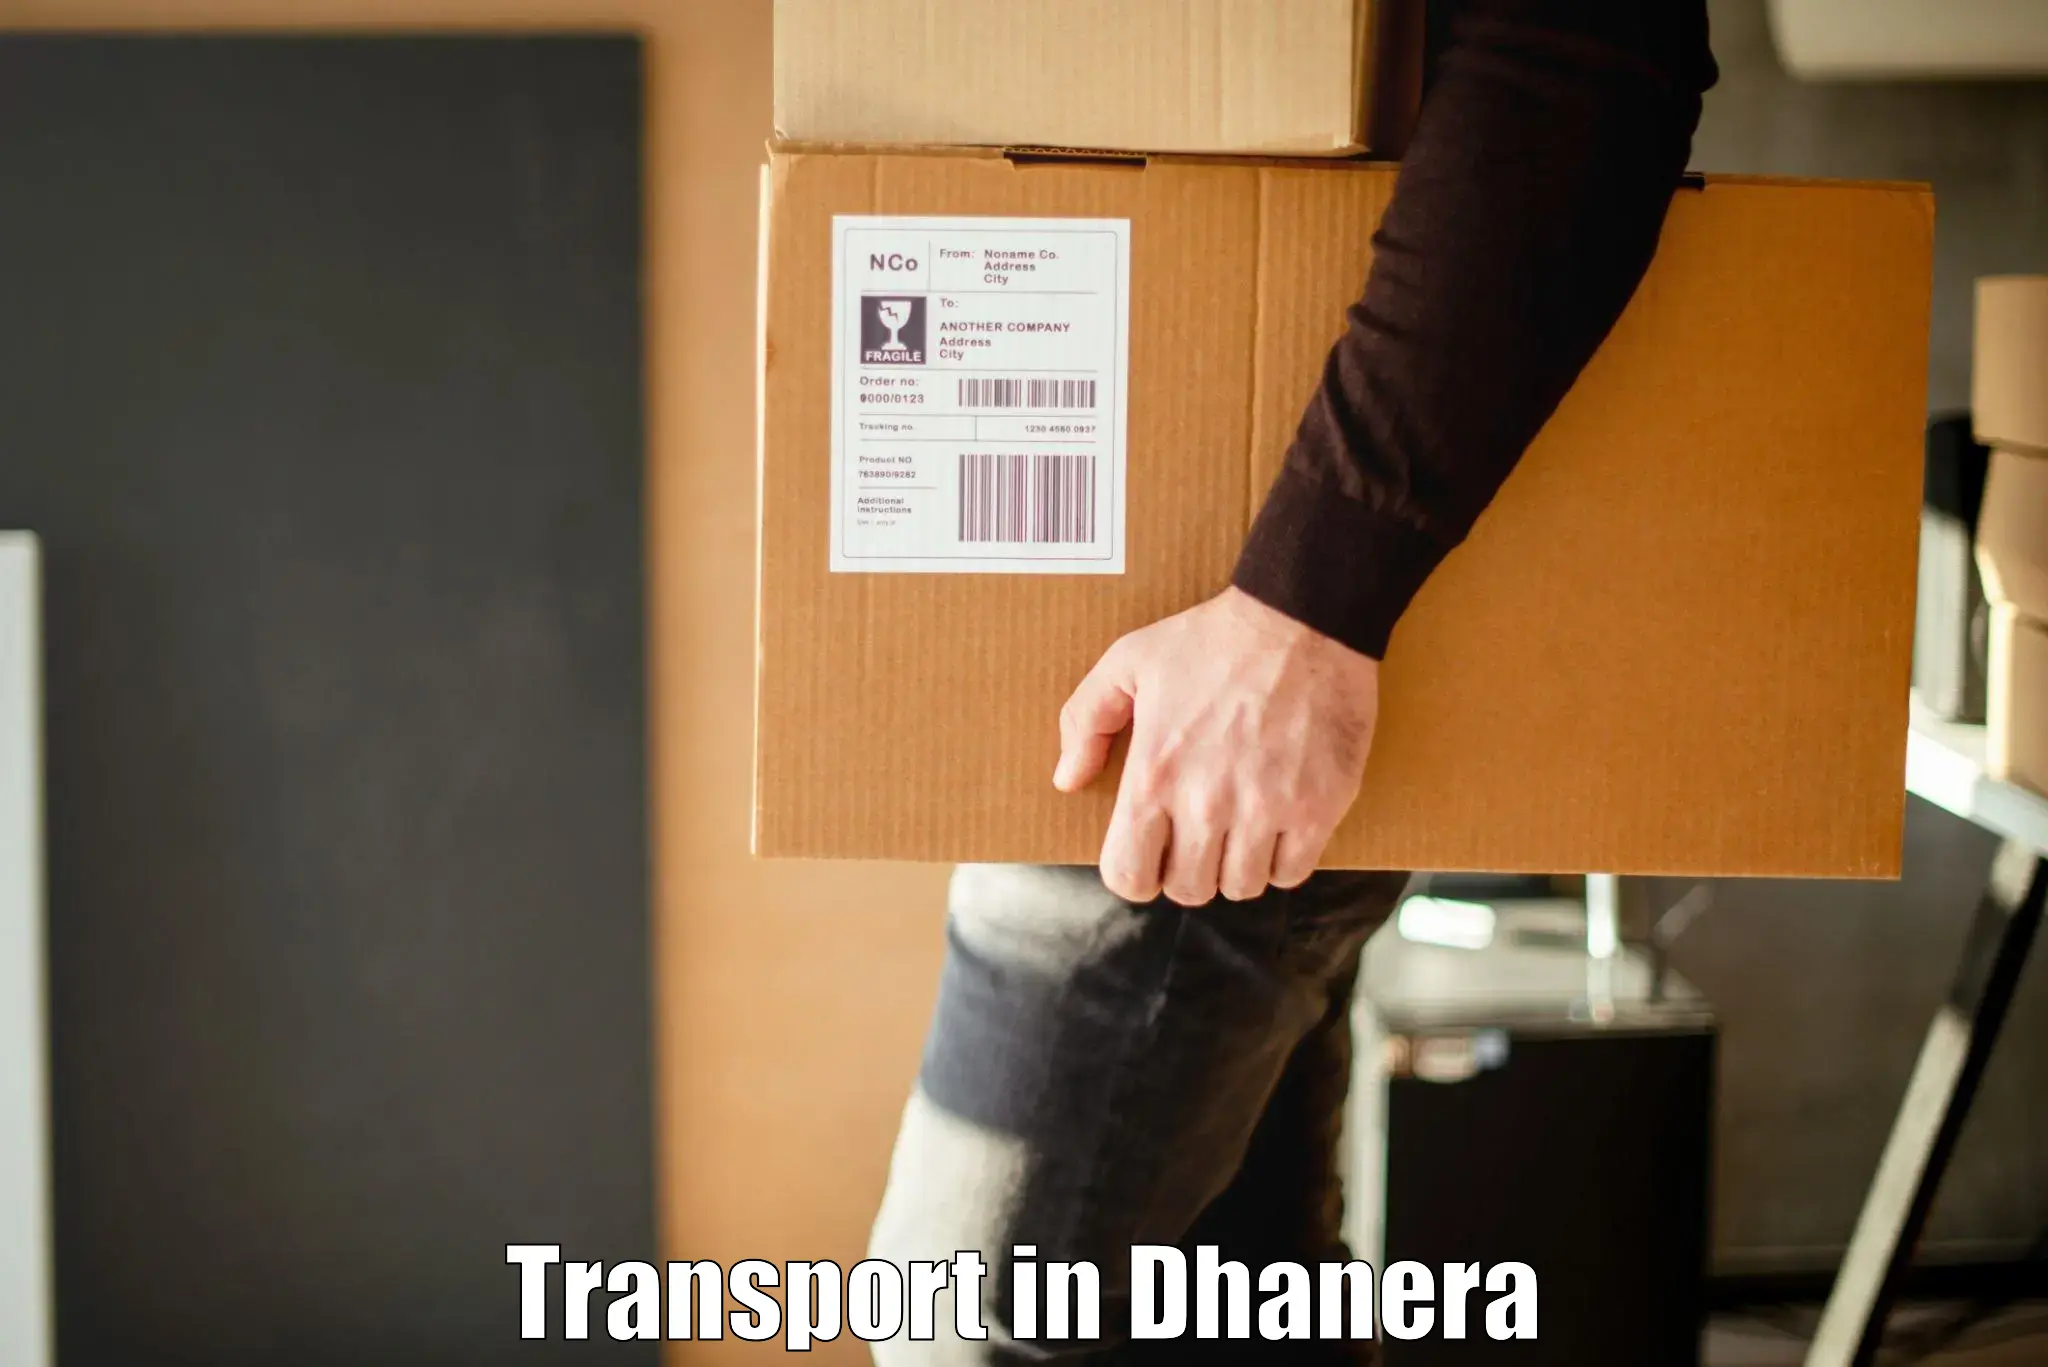 Transport in sharing in Dhanera